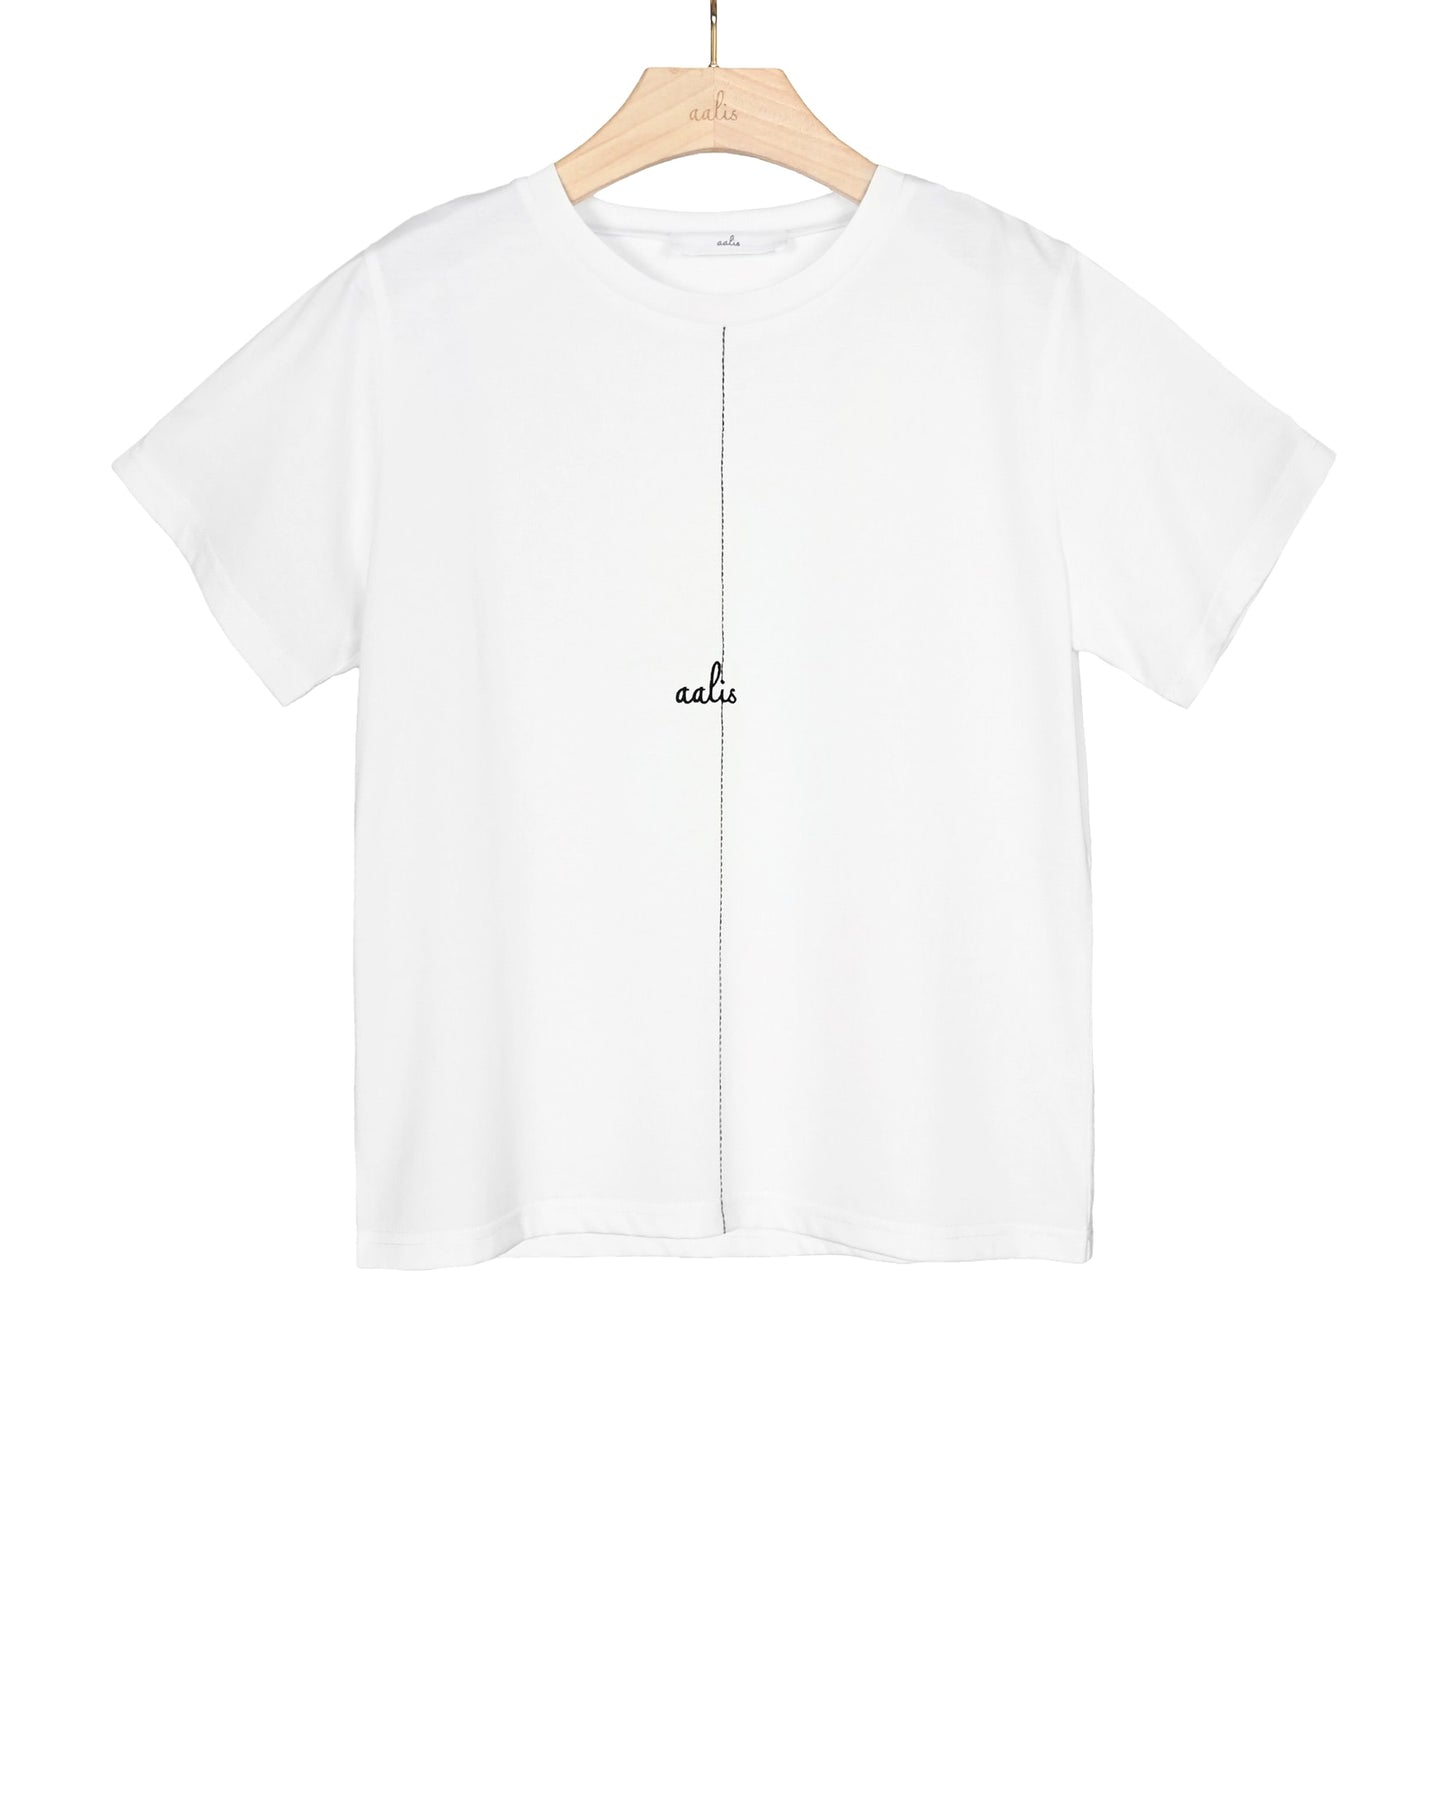 Load image into Gallery viewer, aalis AALIS dotted line logo tee (White)
